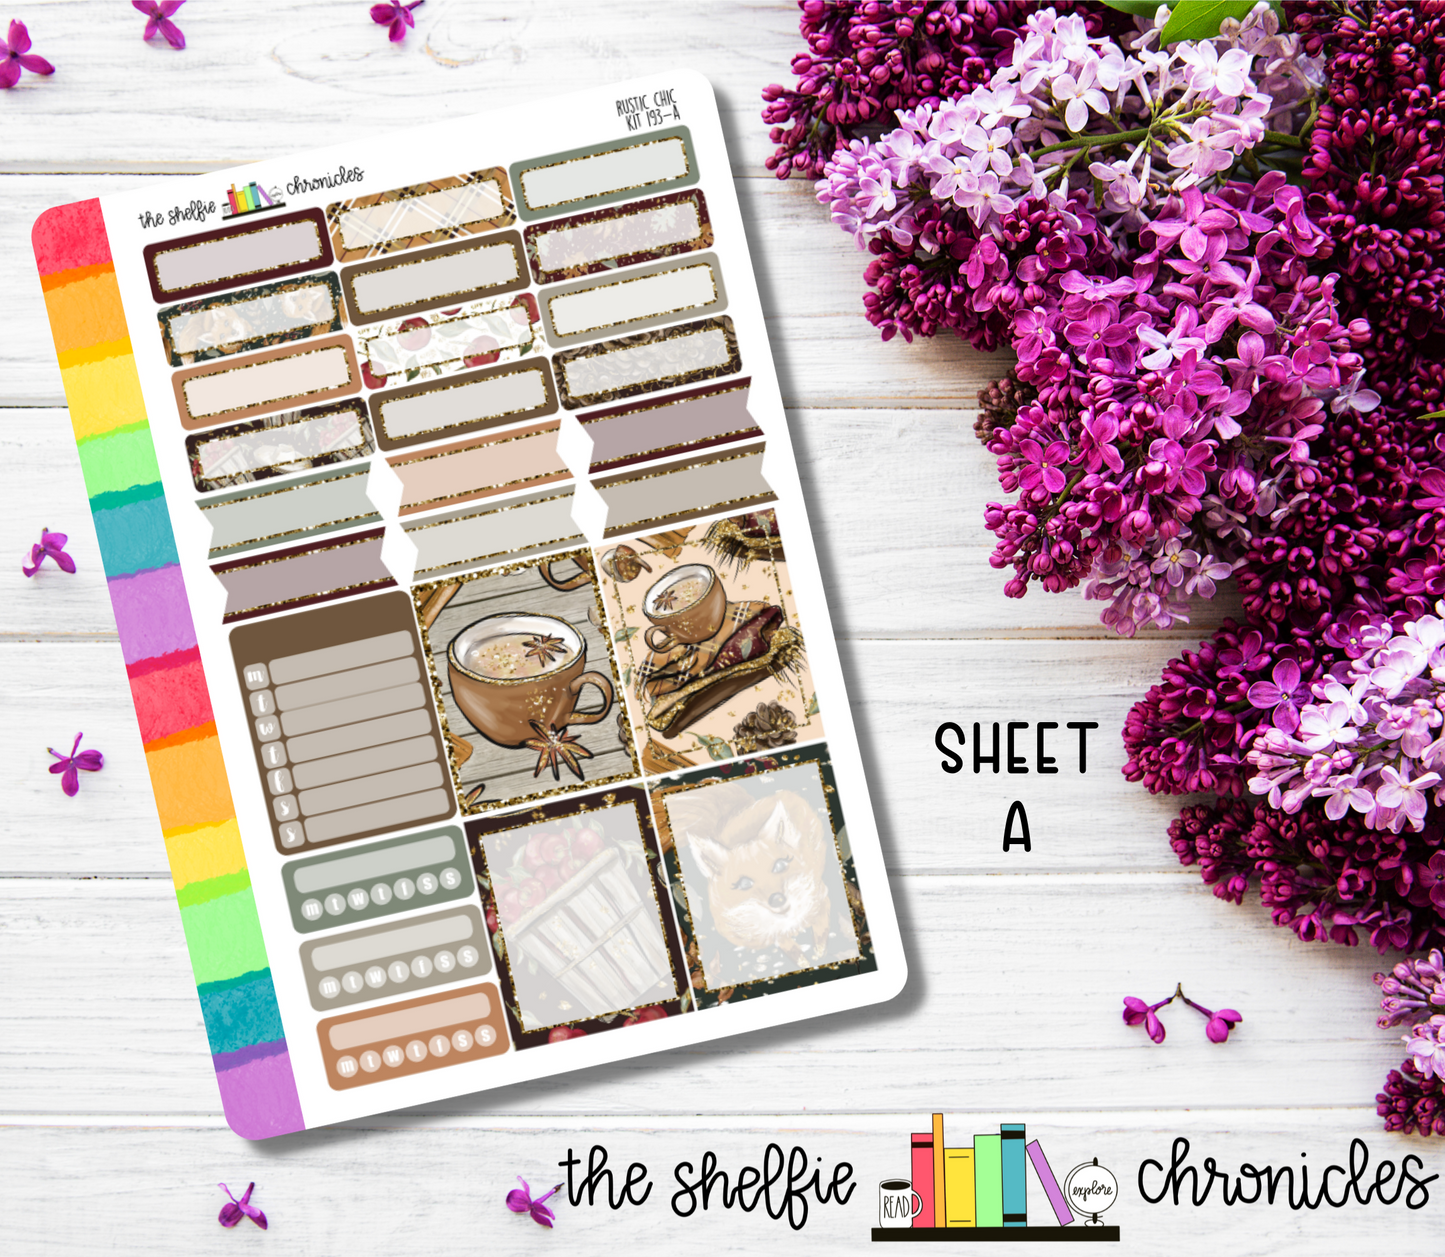 Kit 193 - Rustic Chic Weekly Kit - Die Cut Stickers - Repositionable Paper - Made To Fit 7x9 Planners